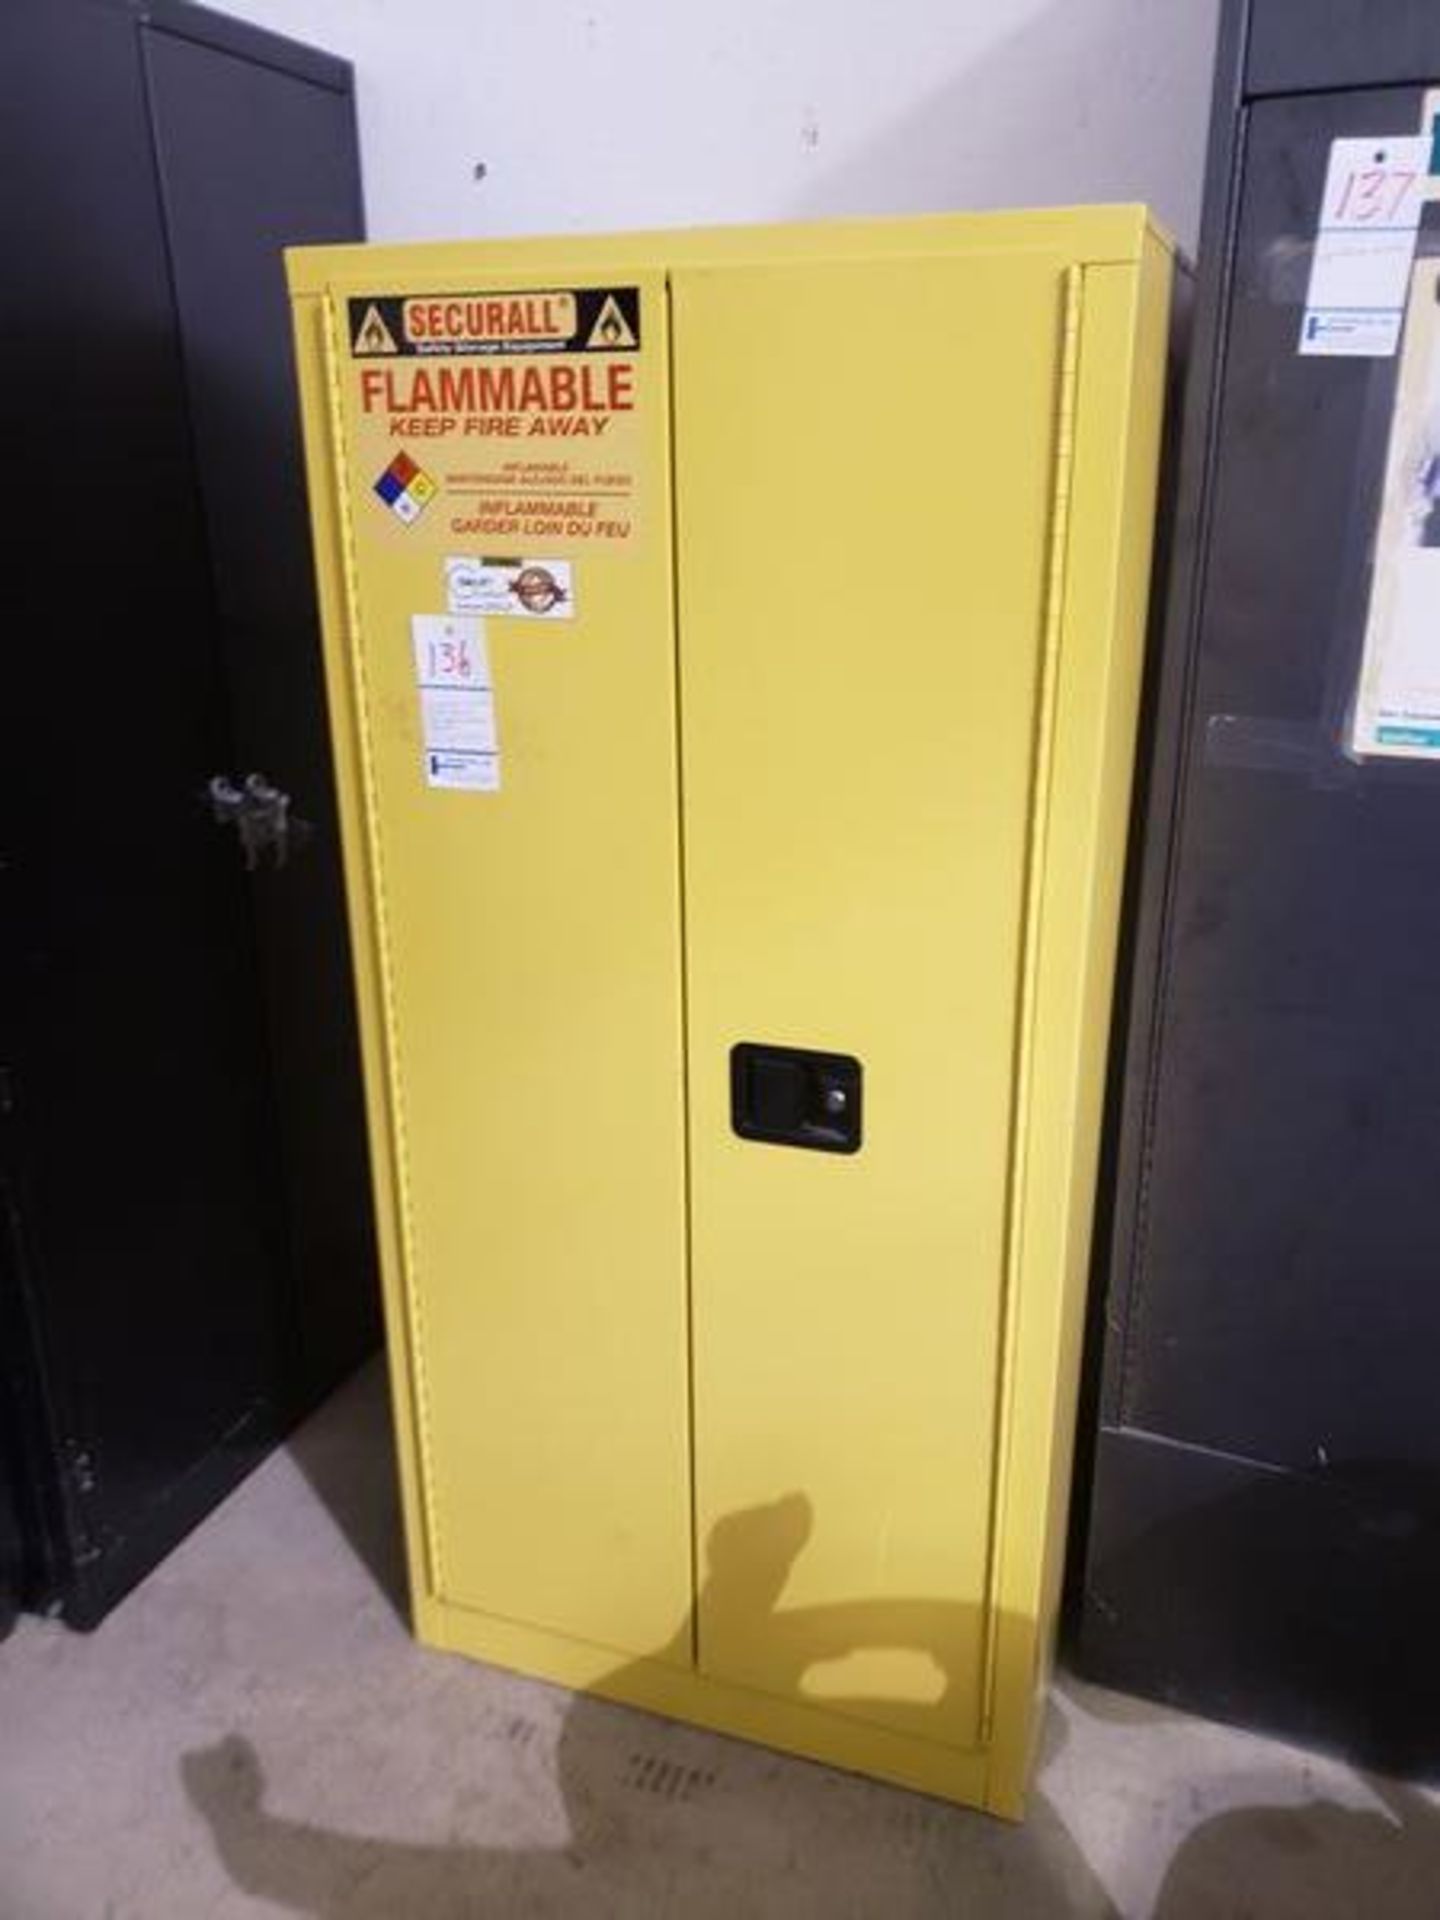 SECURALL MODEL V160 NFPA CODE 30 - DRUM CABINET 31-1/4" X 31" X 65.5"